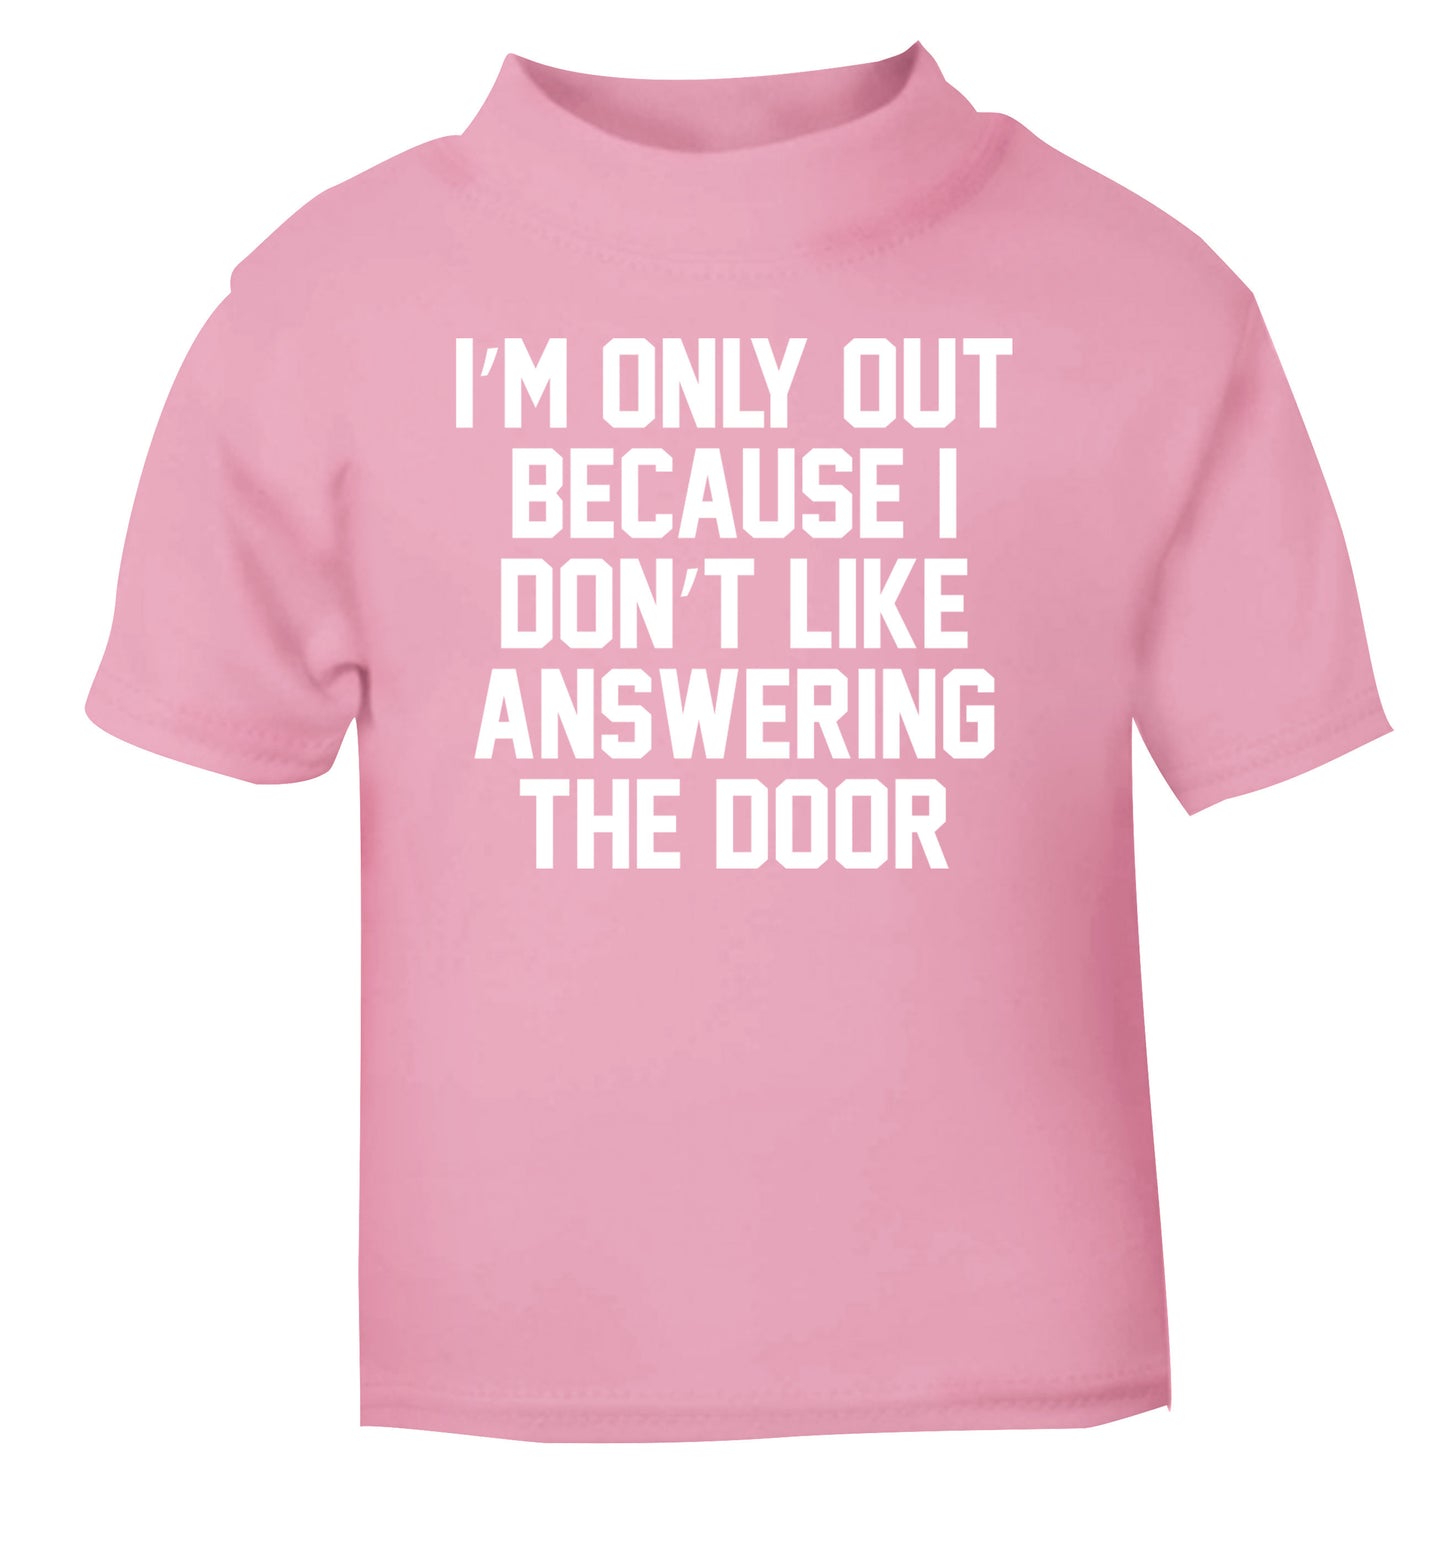 I'm only out because I don't like answering the door light pink Baby Toddler Tshirt 2 Years